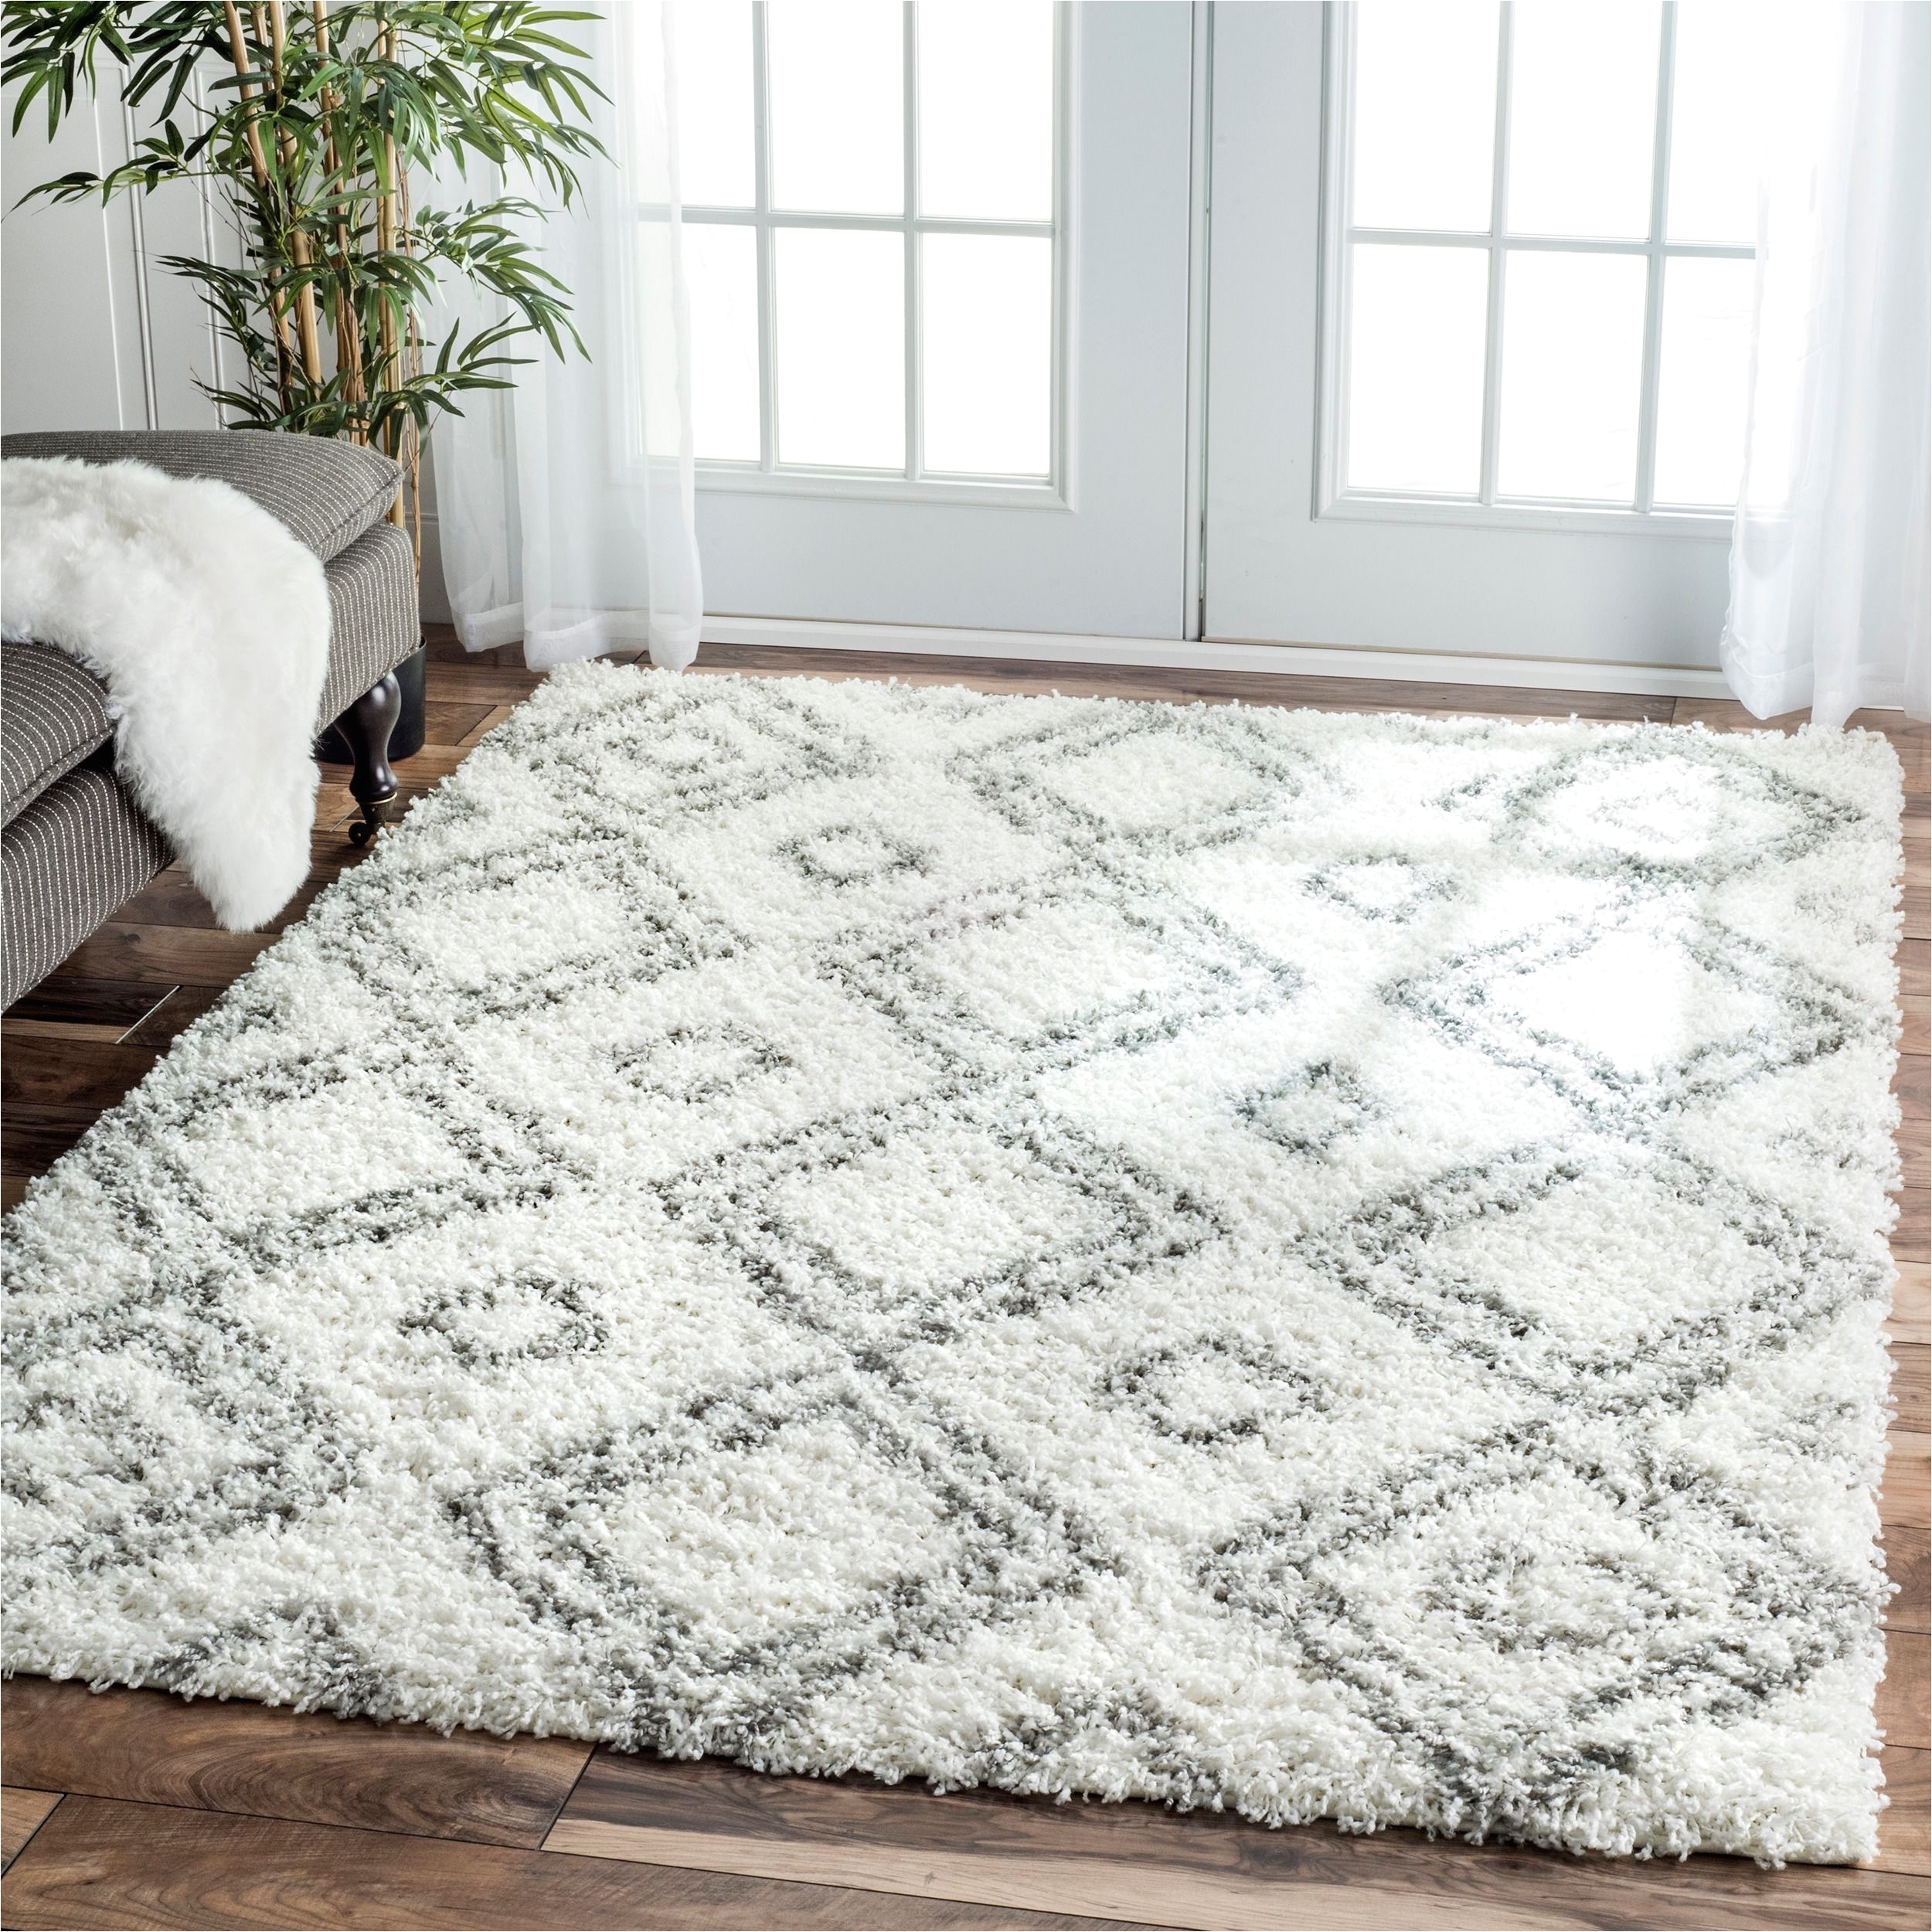 inspired by moroccan berber carpets this trellis shag rug adds depth to your decor made of polypropylene this soft and plush shag rug feels great under